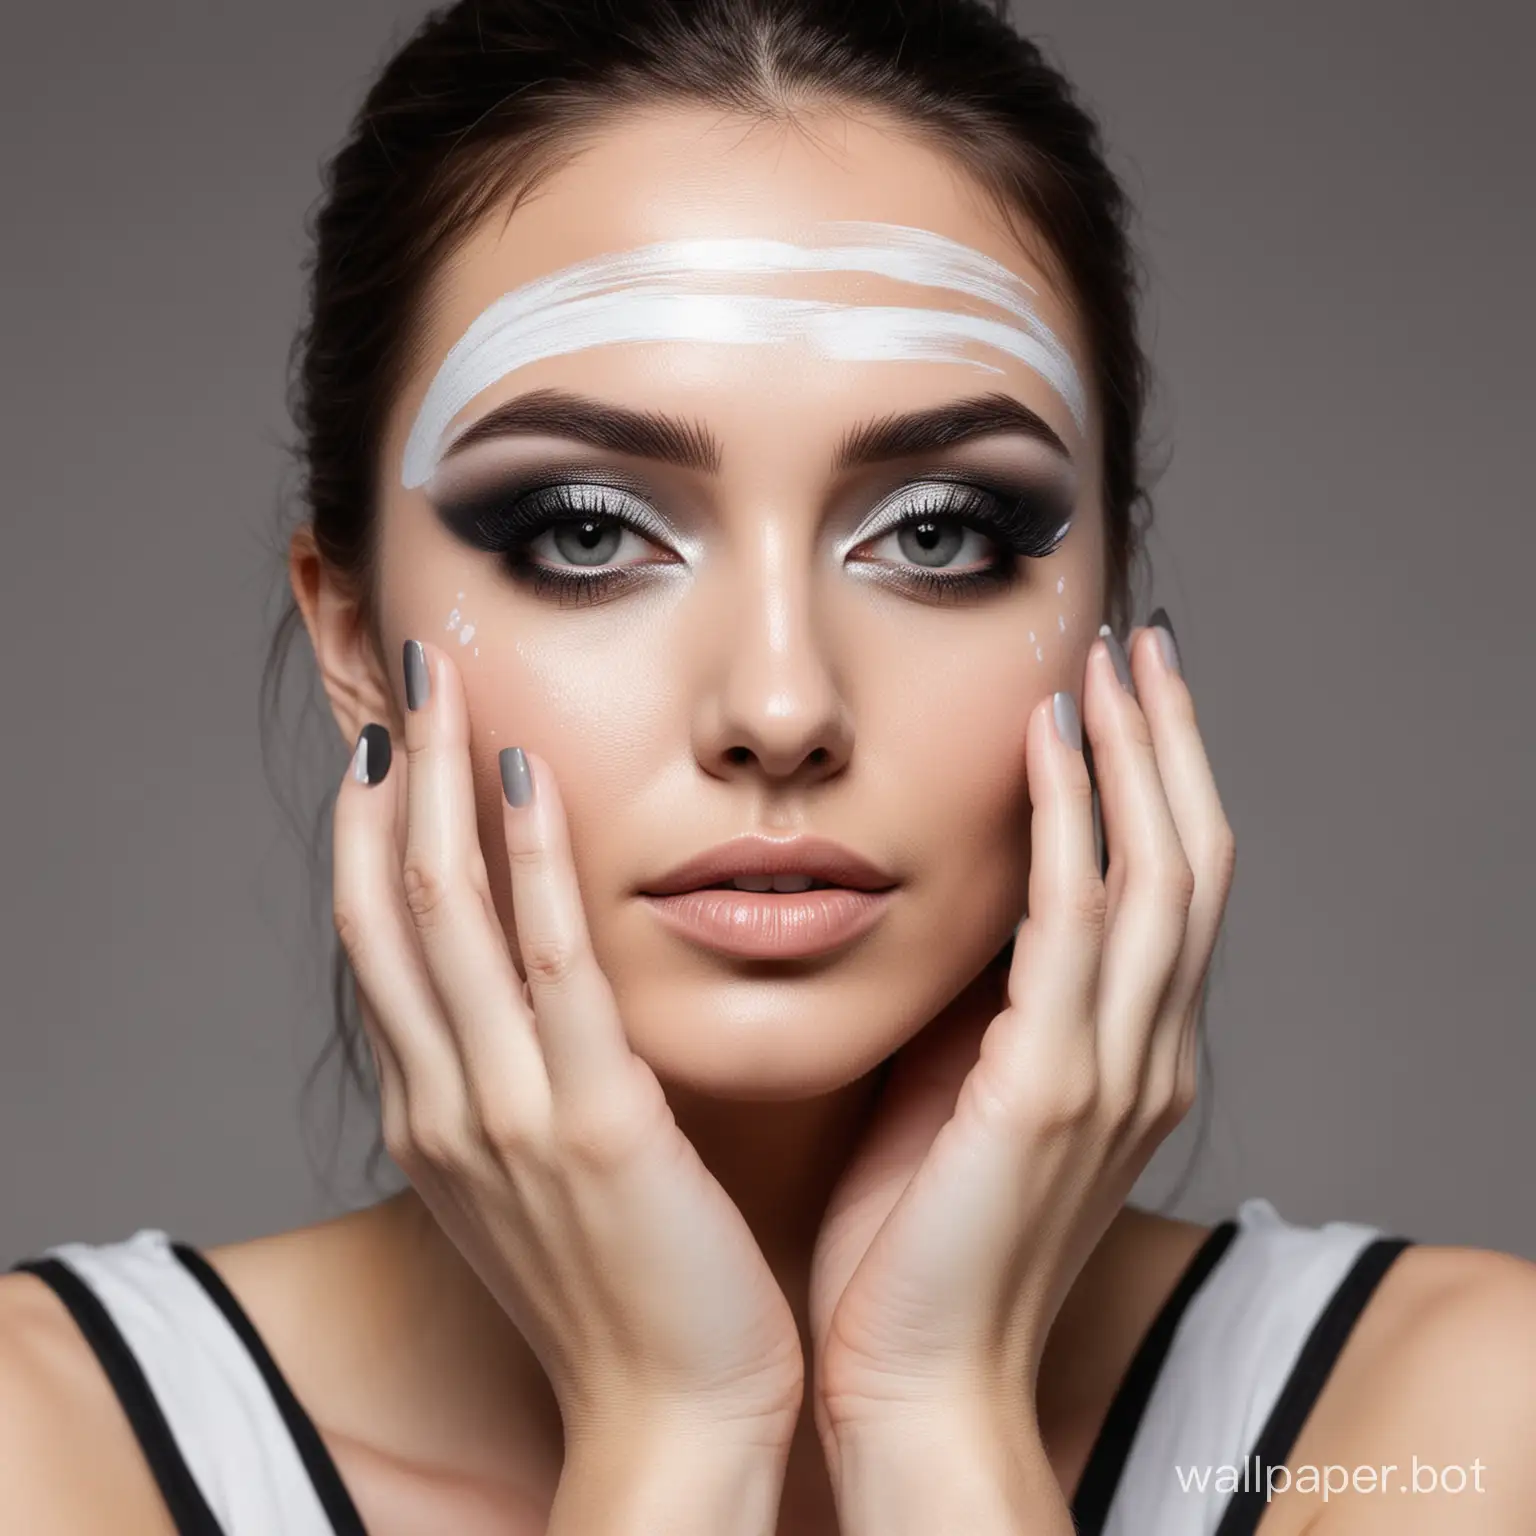 woman with black, grey and white make up , she is touching her face with her hands, more backgrond spac